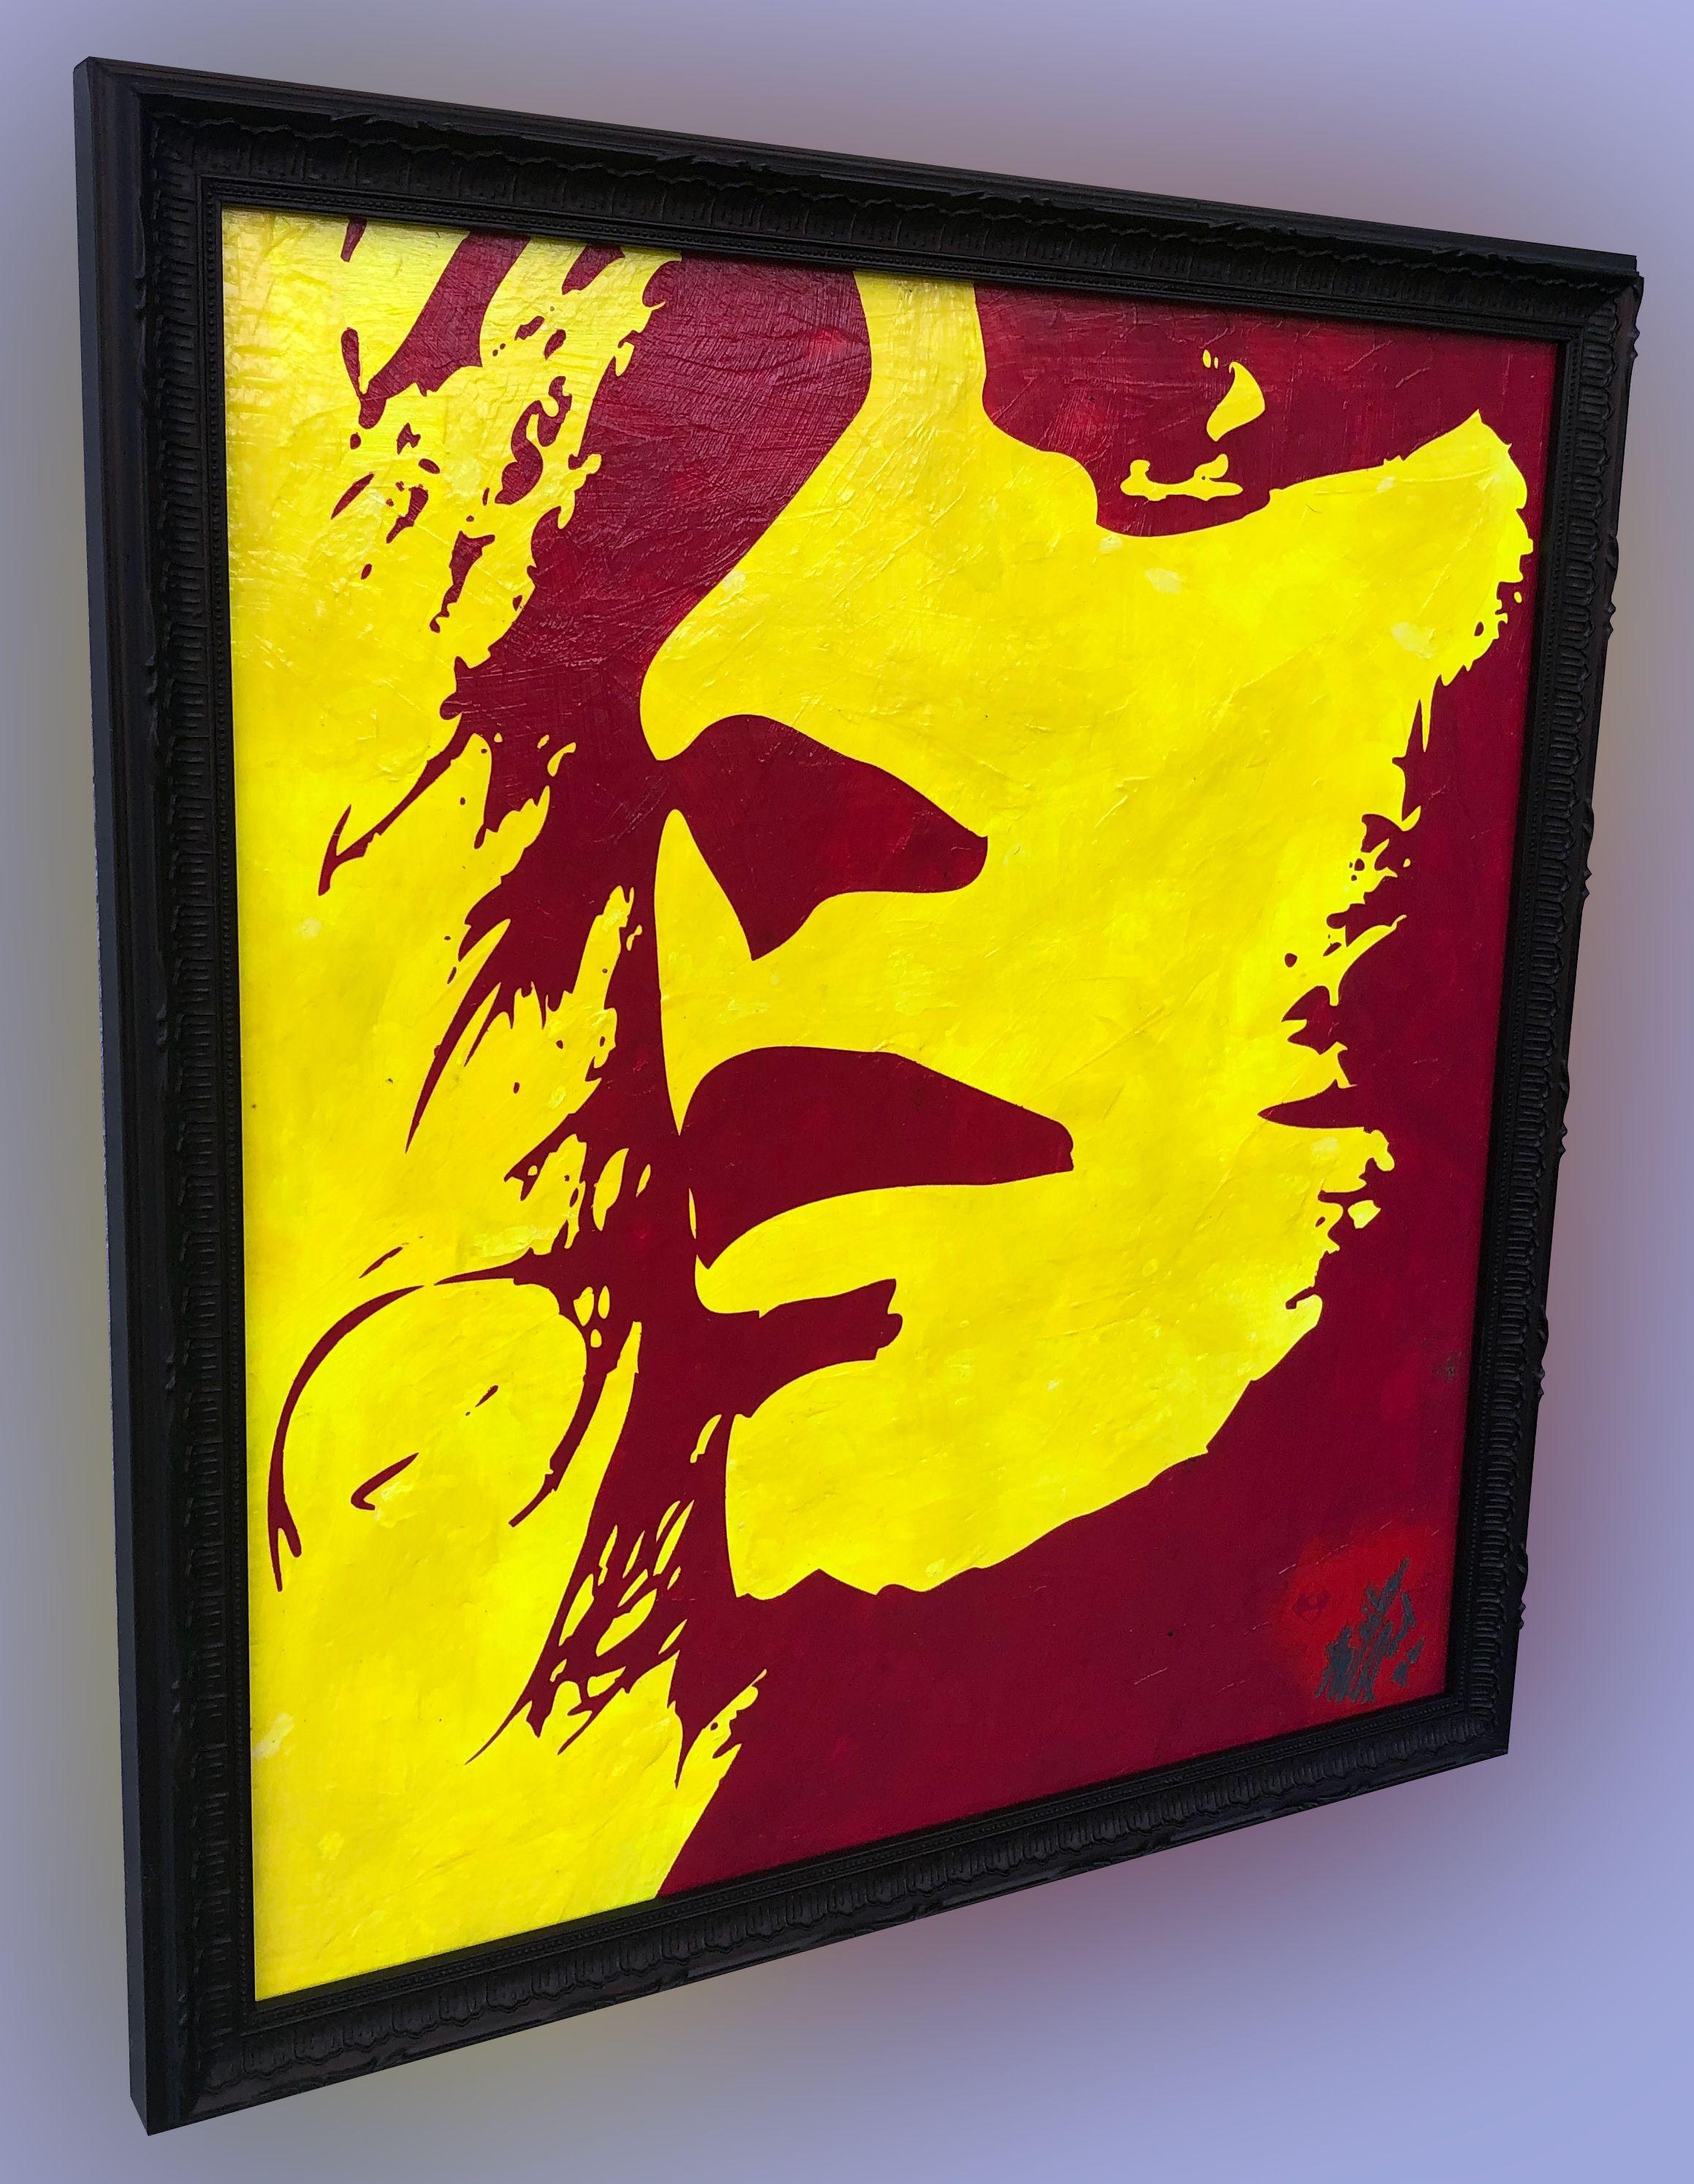 Neon Yellow with Magenta Paint Fun little painting to finish off a room. Stencil art with a dash of pop art. Enjoy looking at this and wondering what is she looking at. It could be anything. Taking stencil art to a new level! Enjoy! :: Painting ::